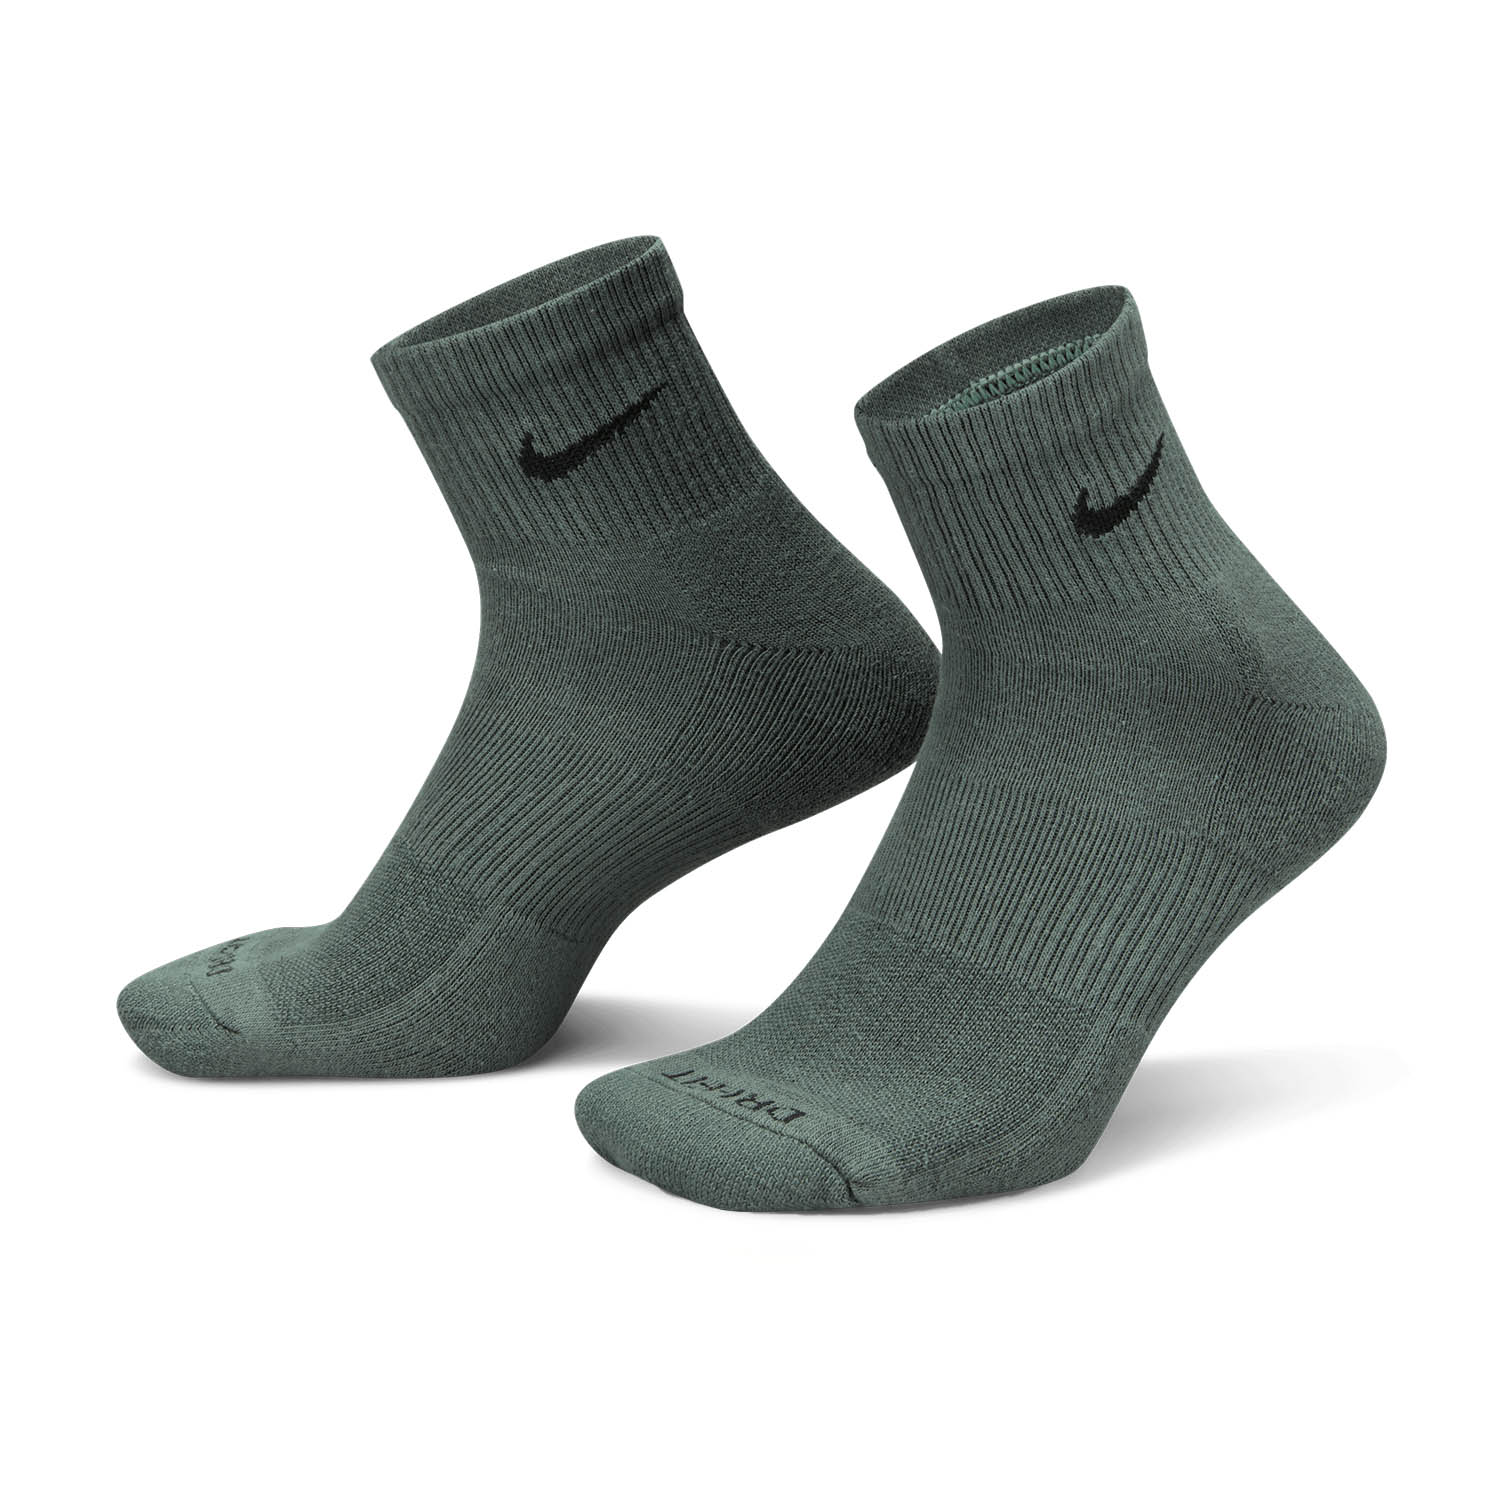 Nike Everyday Plus Cushioned x 3 Calcetines - Green/Black